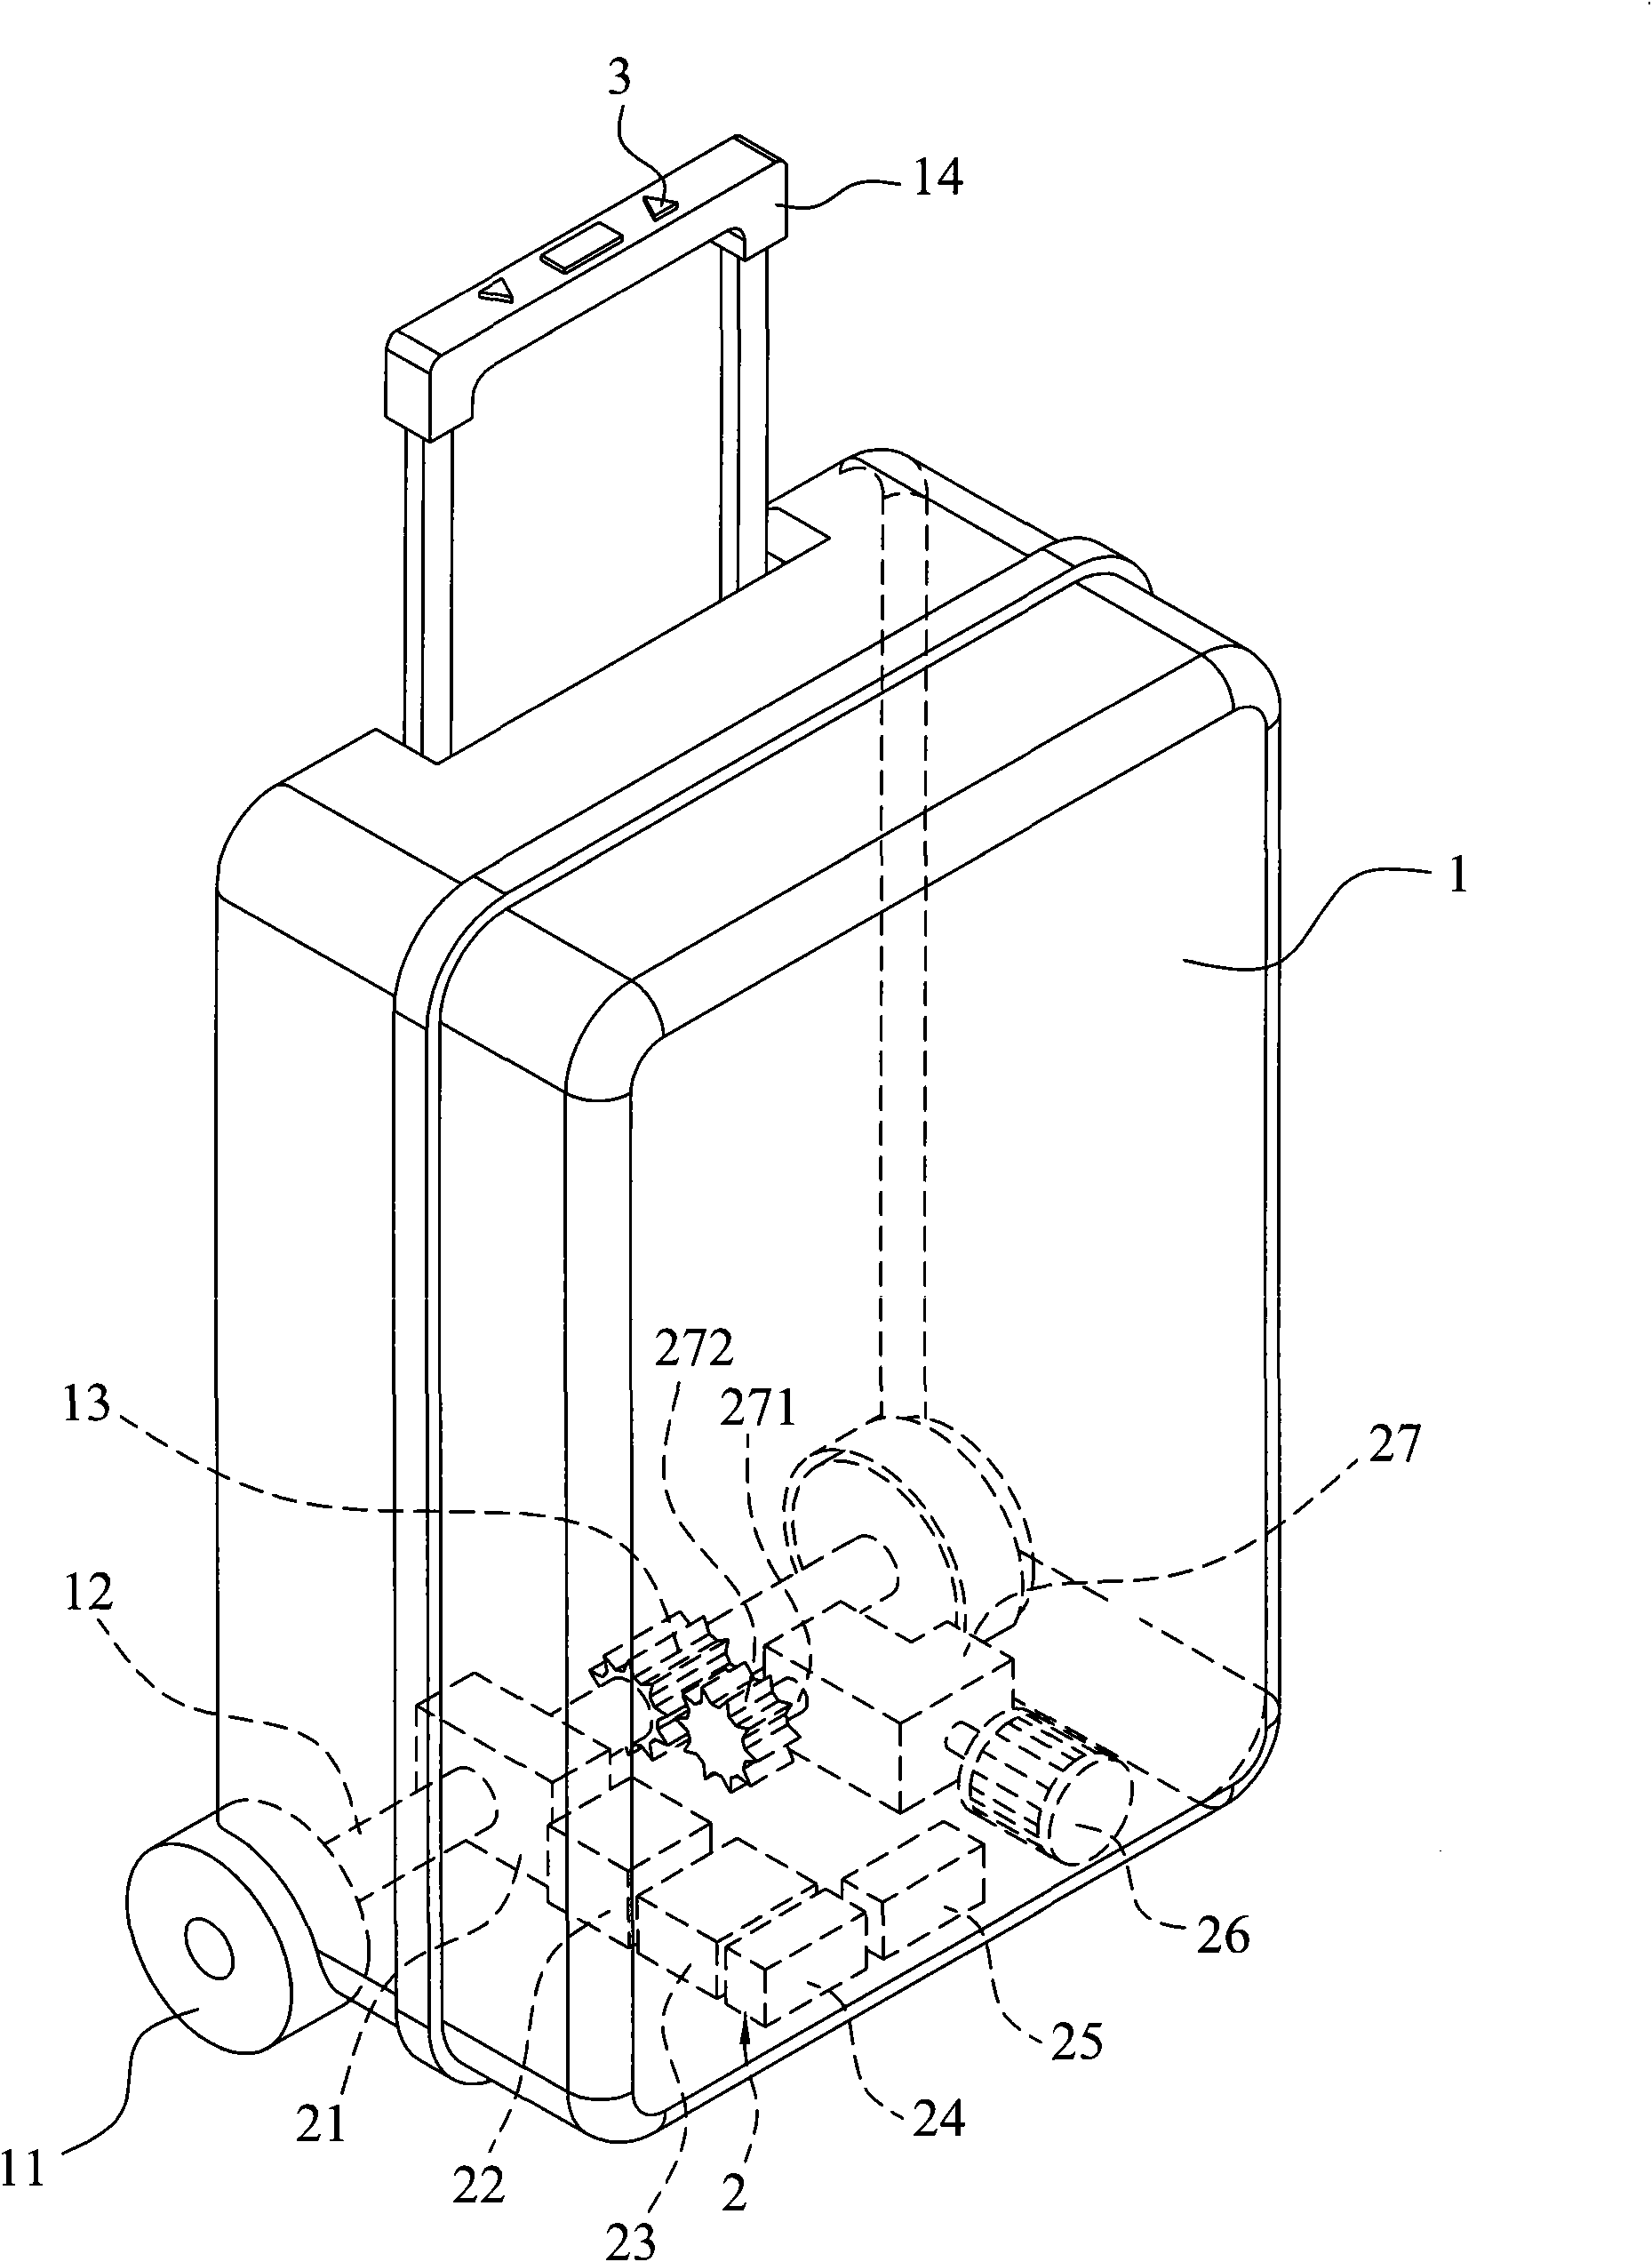 Auxiliary device for hauling trunk